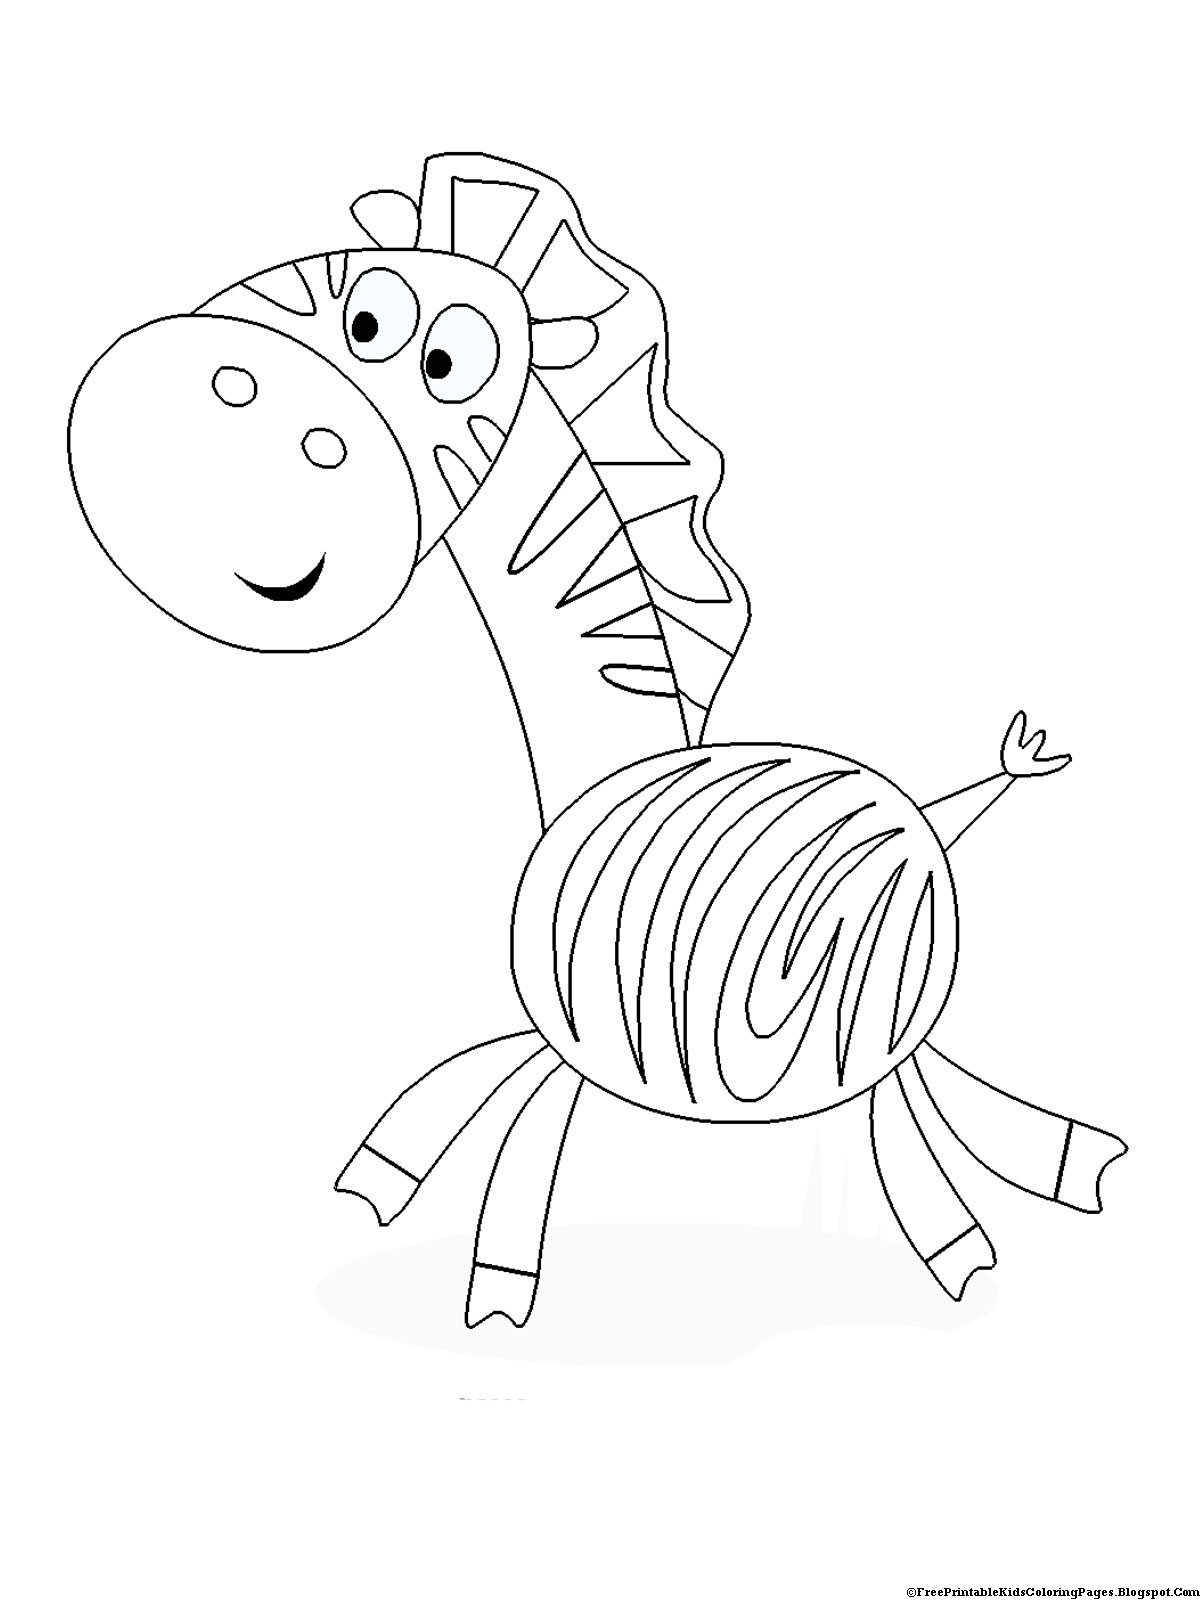 Coloring-Pages-Kids
 Zebra Coloring Pages Free Printable Kids Coloring Pages